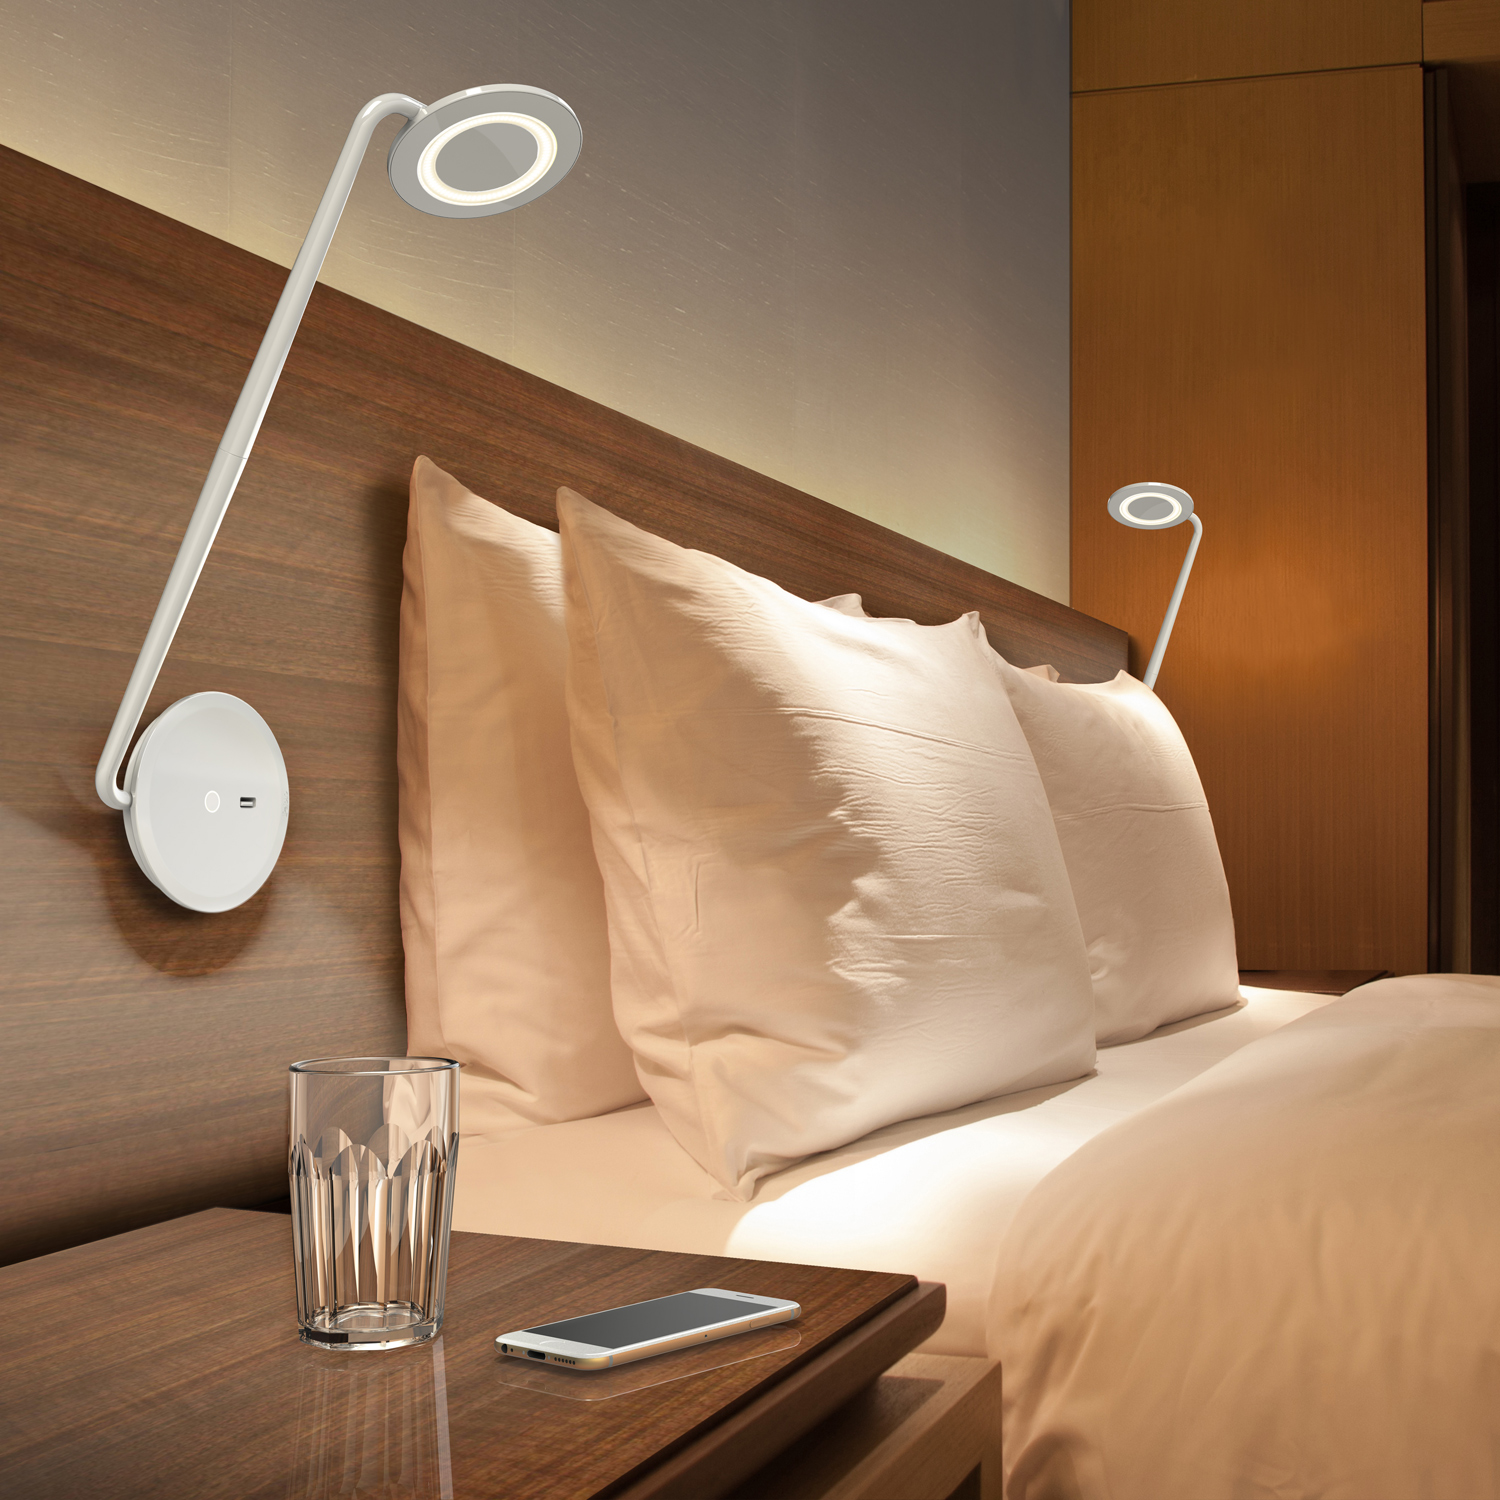 Pixo Wall Light attached to headboard for reading lighting.